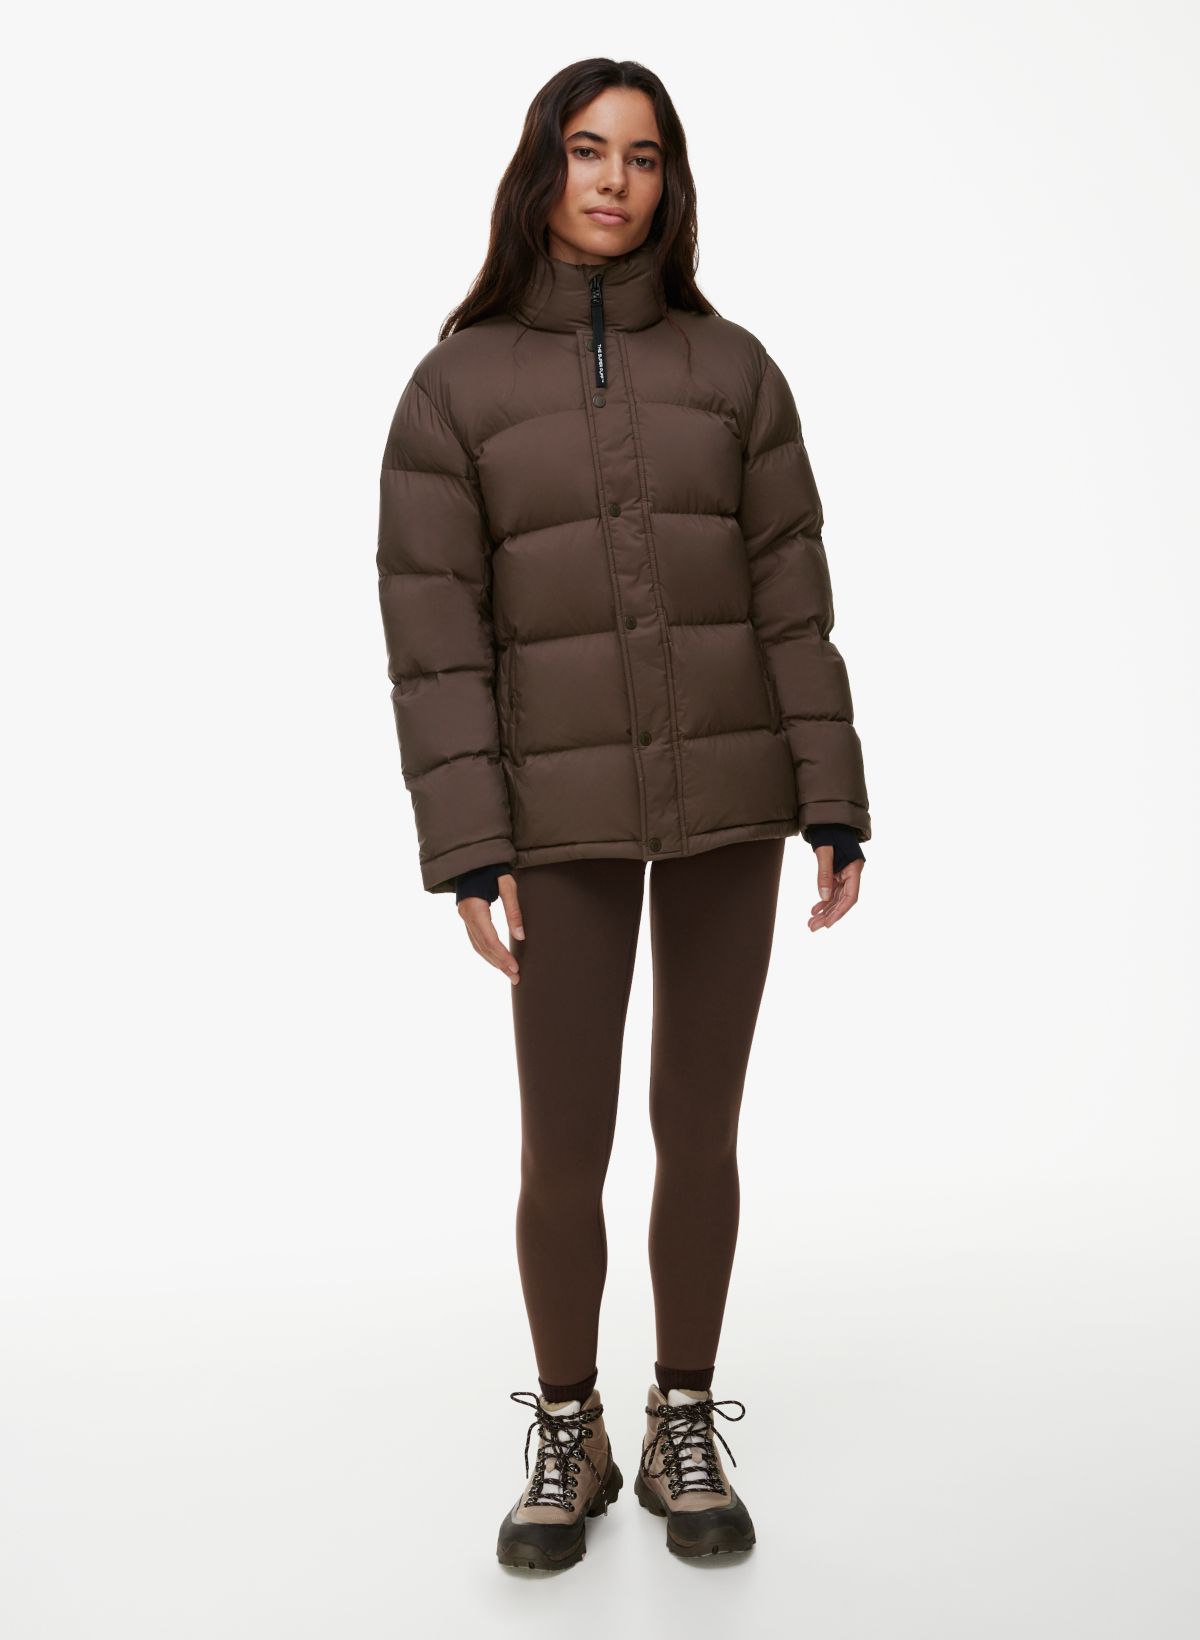 13 women's puffer coats for winter: North Face, Aritzia, and more